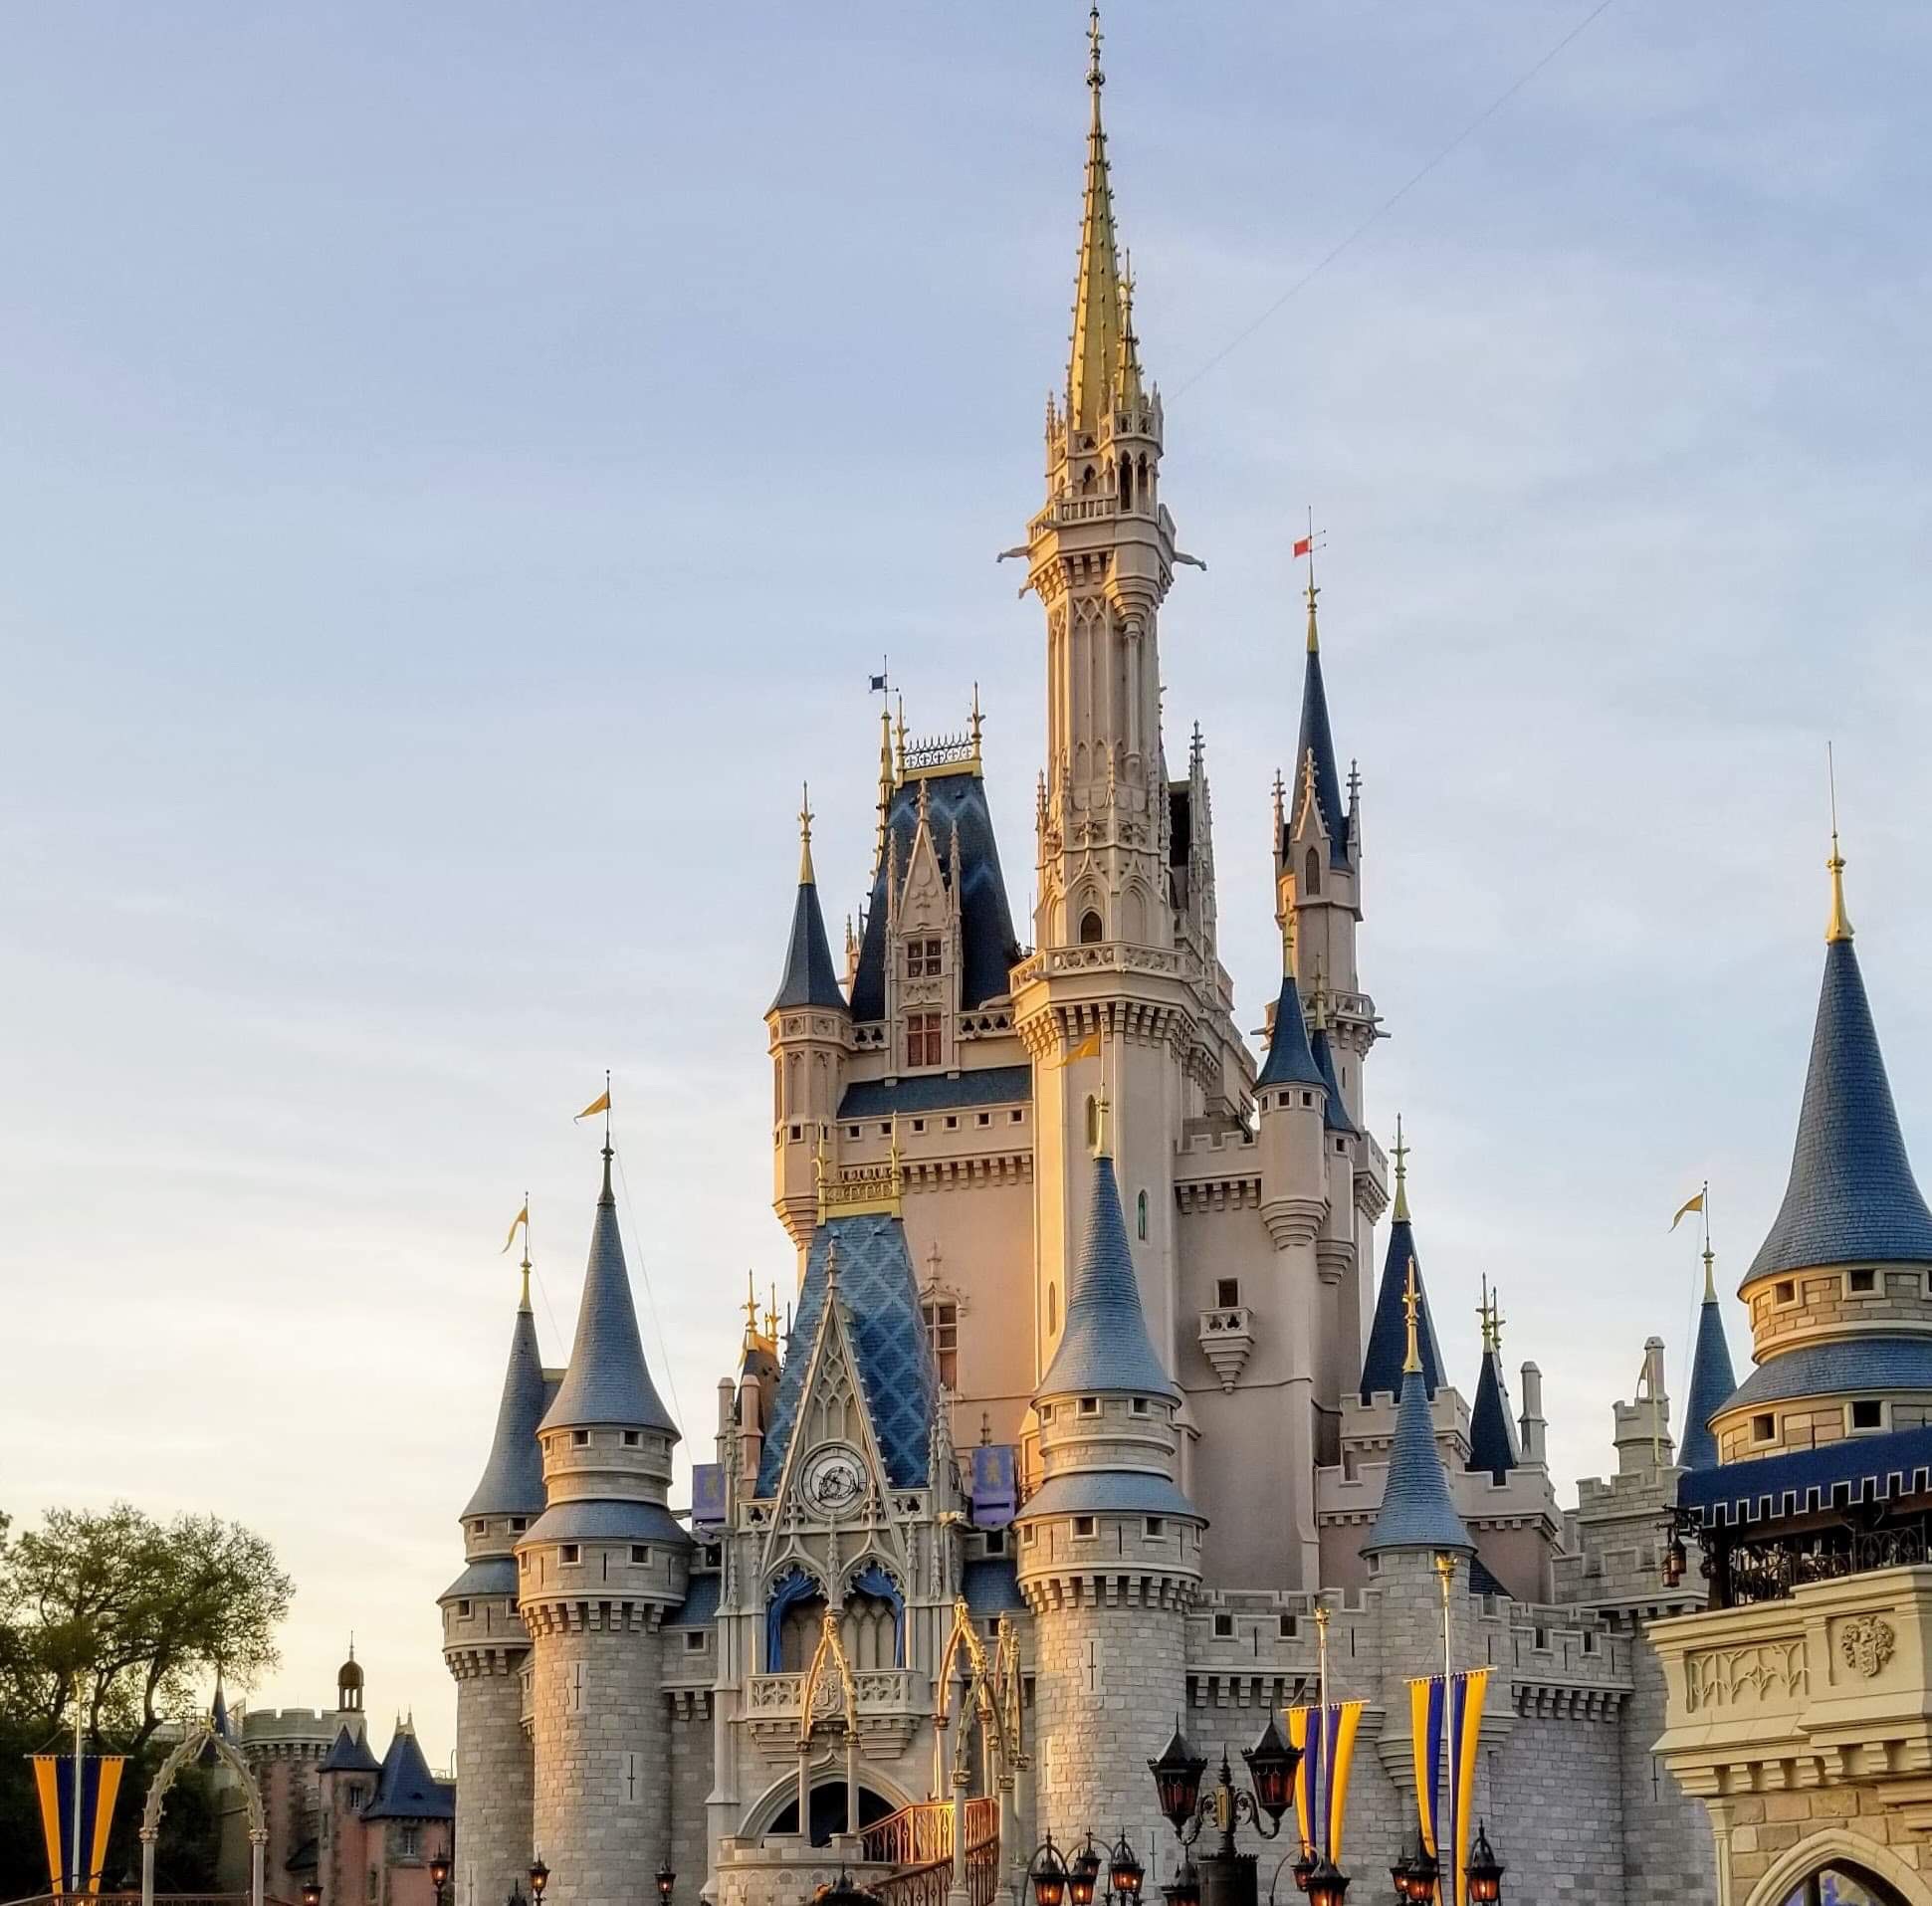 Walt Disney World Summer Vacation Packages Just Released Including Free Dining